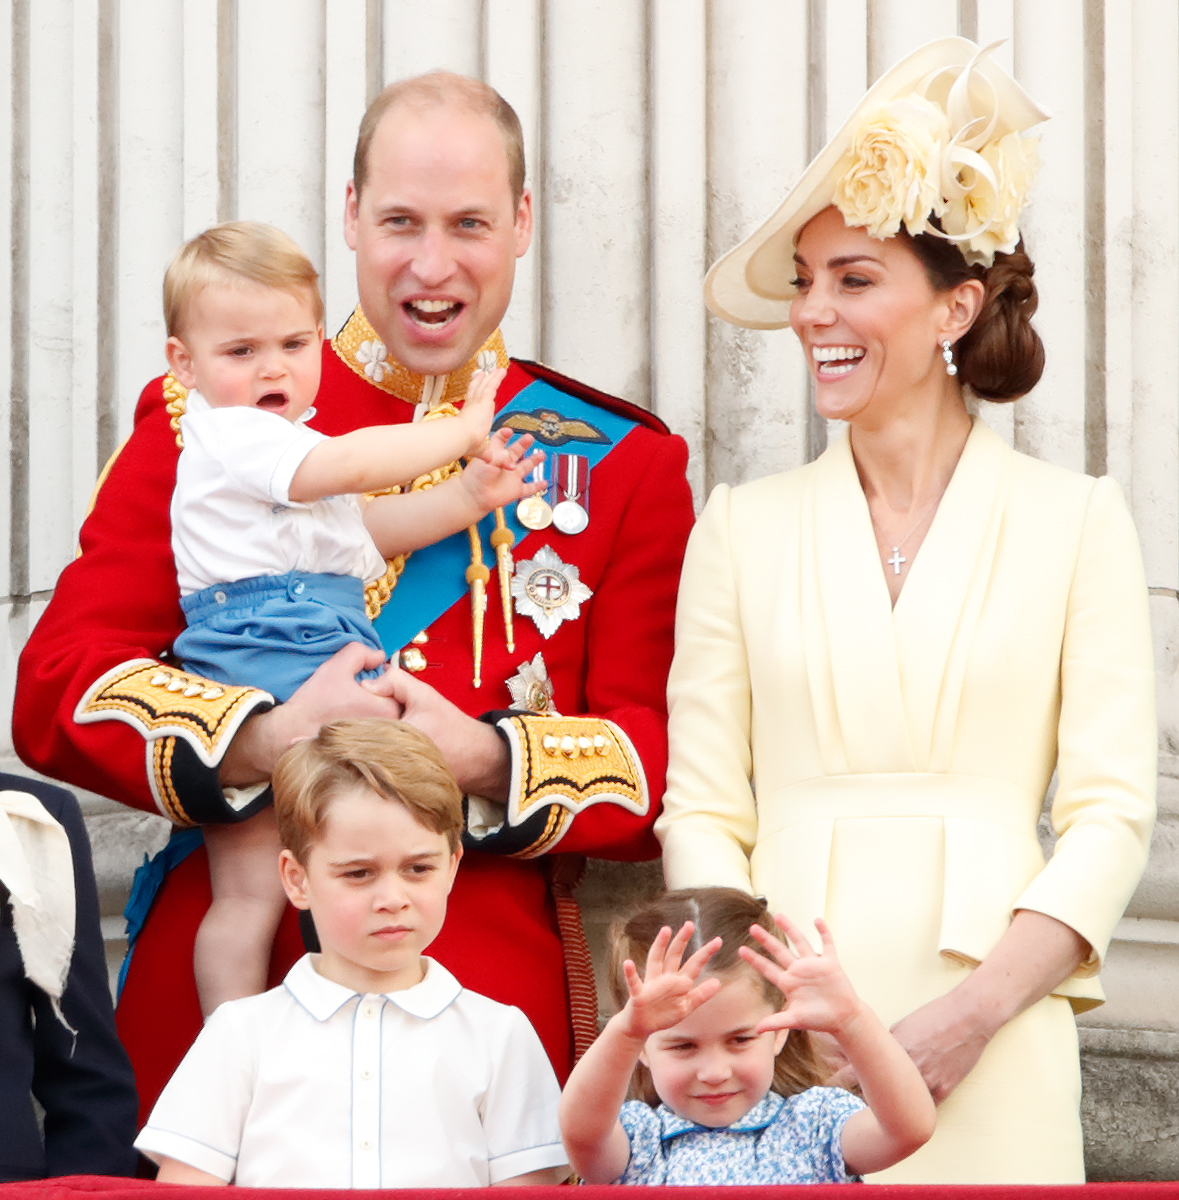 Prince William and Kate Middleton with their children at Trooping the Colour